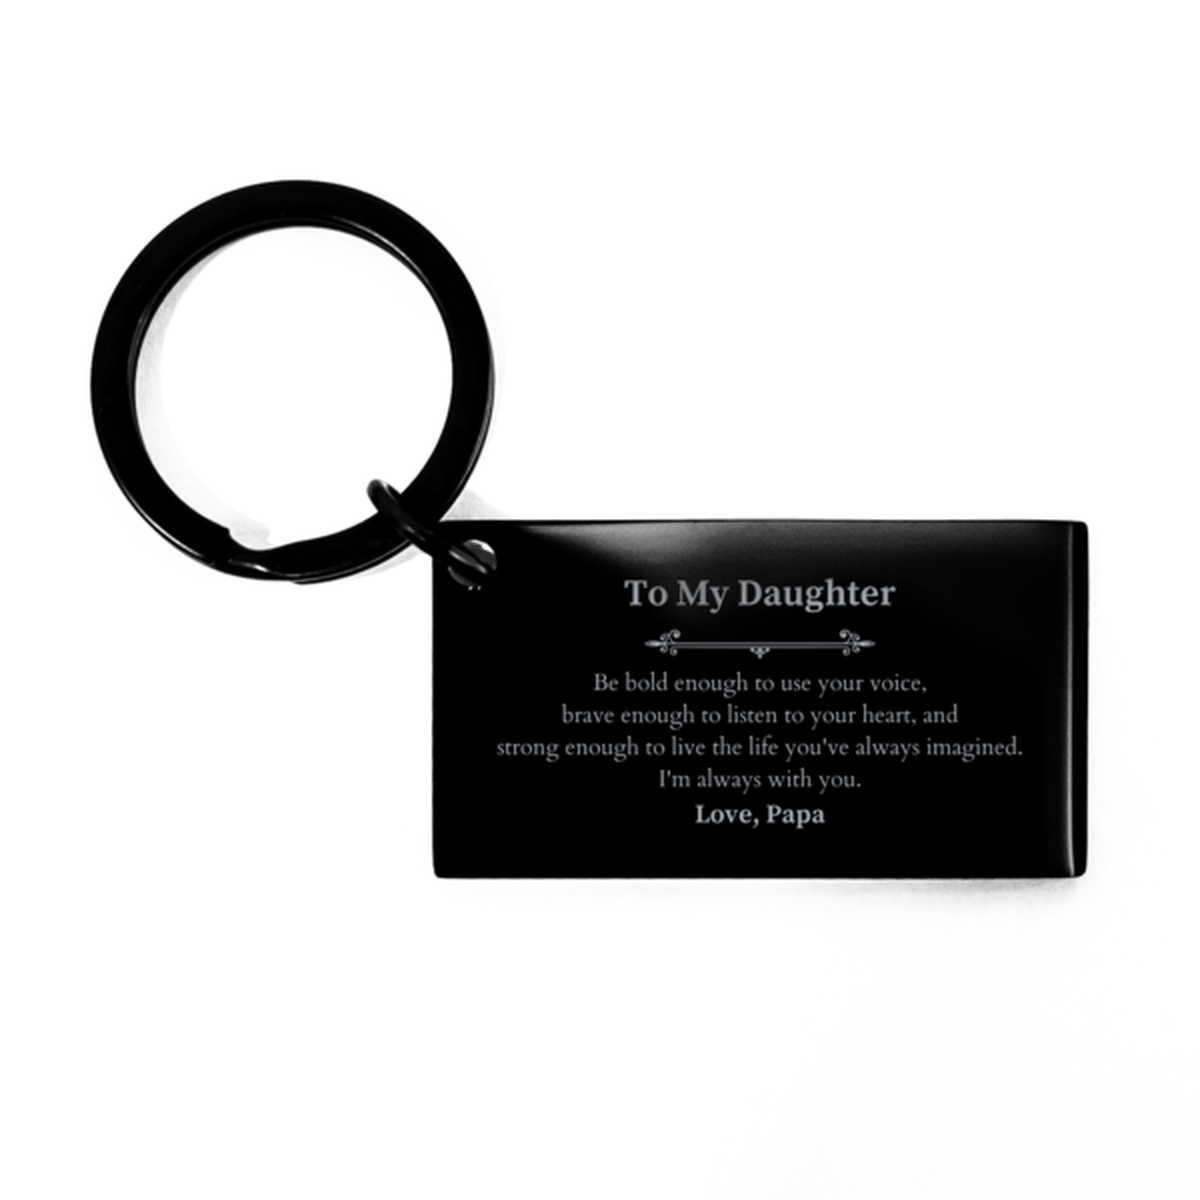 Keepsake Daughter Keychain Gift Idea Graduation Christmas Birthday Daughter from Papa, Daughter Be bold enough to use your voice, brave enough to listen to your heart. Love, Papa